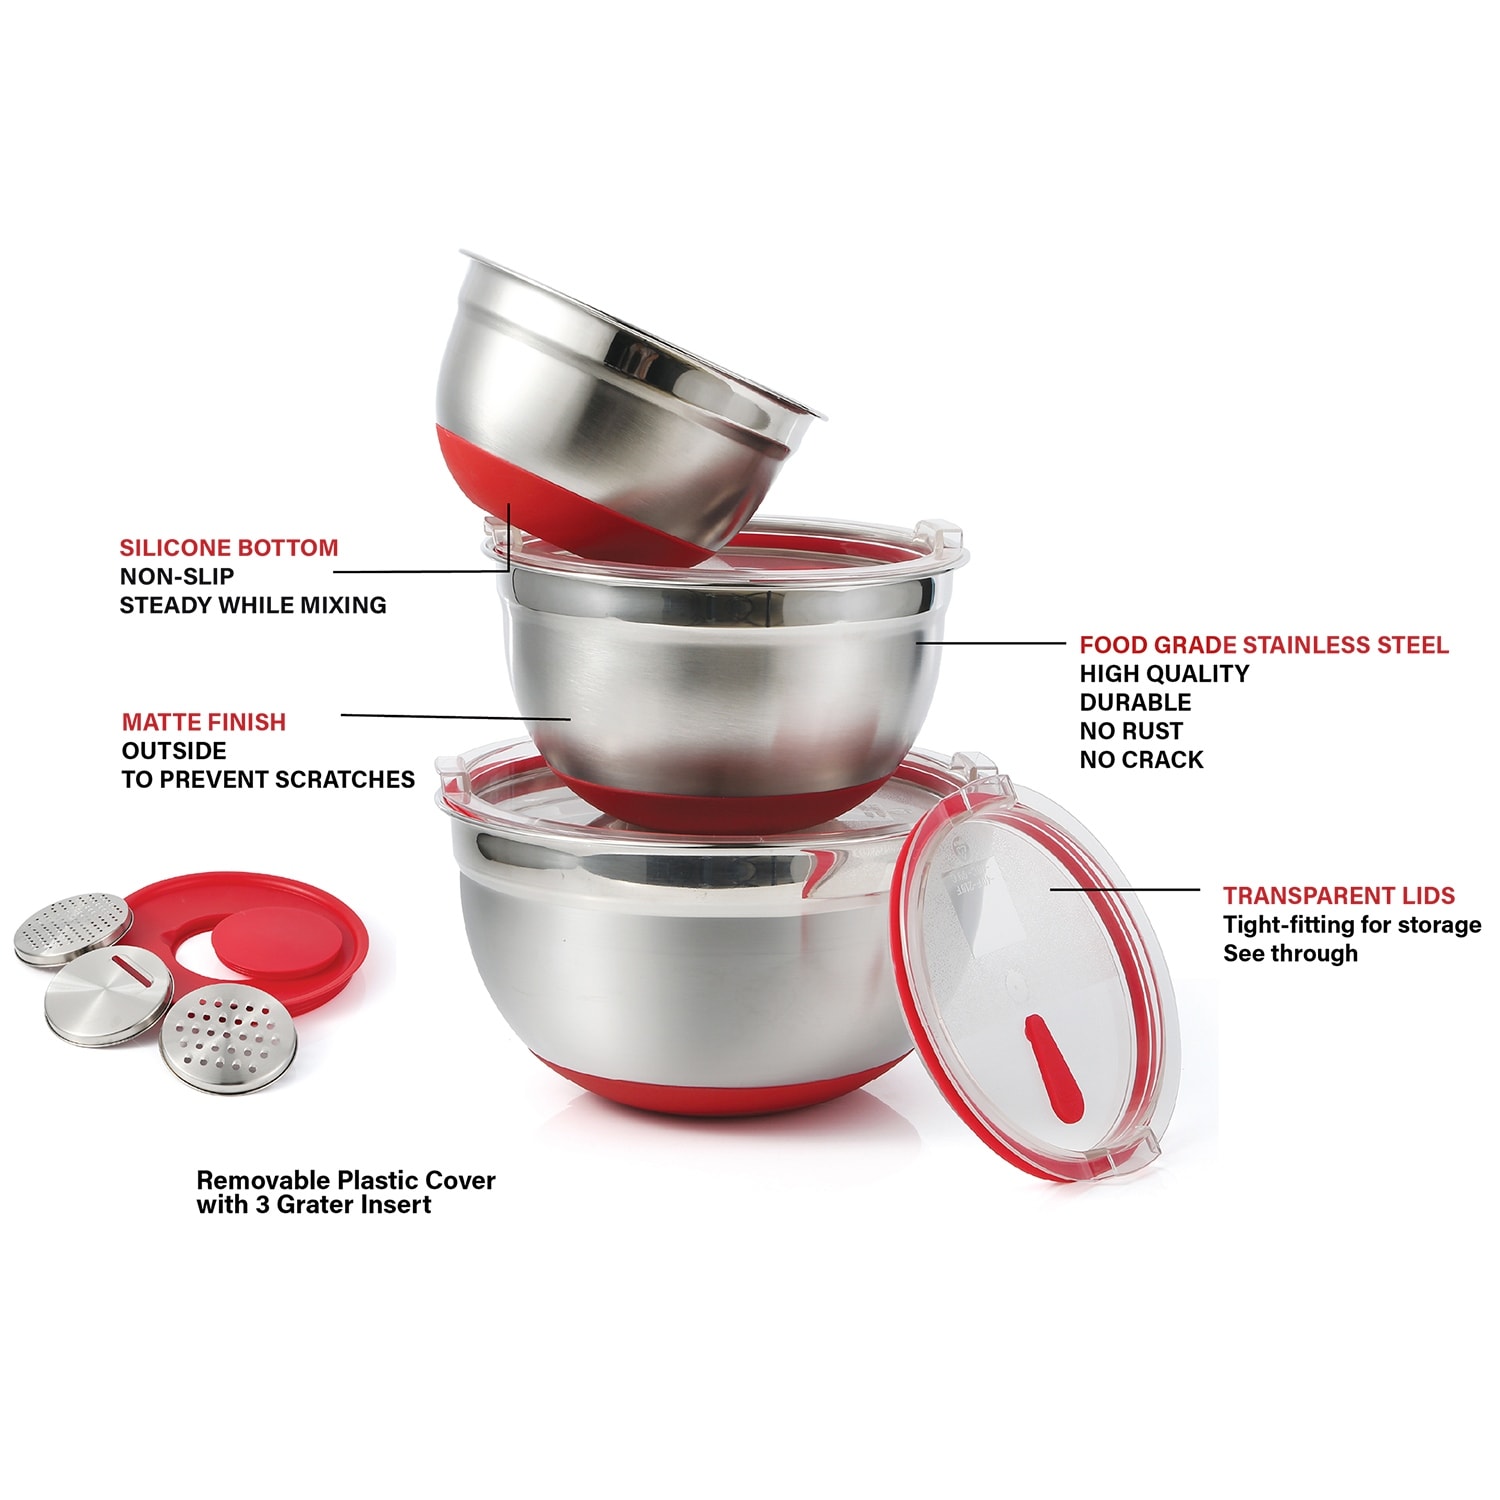 https://ak1.ostkcdn.com/images/products/is/images/direct/e5faf71a0b022fad91c048839a6987fe29b8c039/Gourmet-Edge-10pc-Stainless-Steel-Mixing-Bowl-Set.jpg